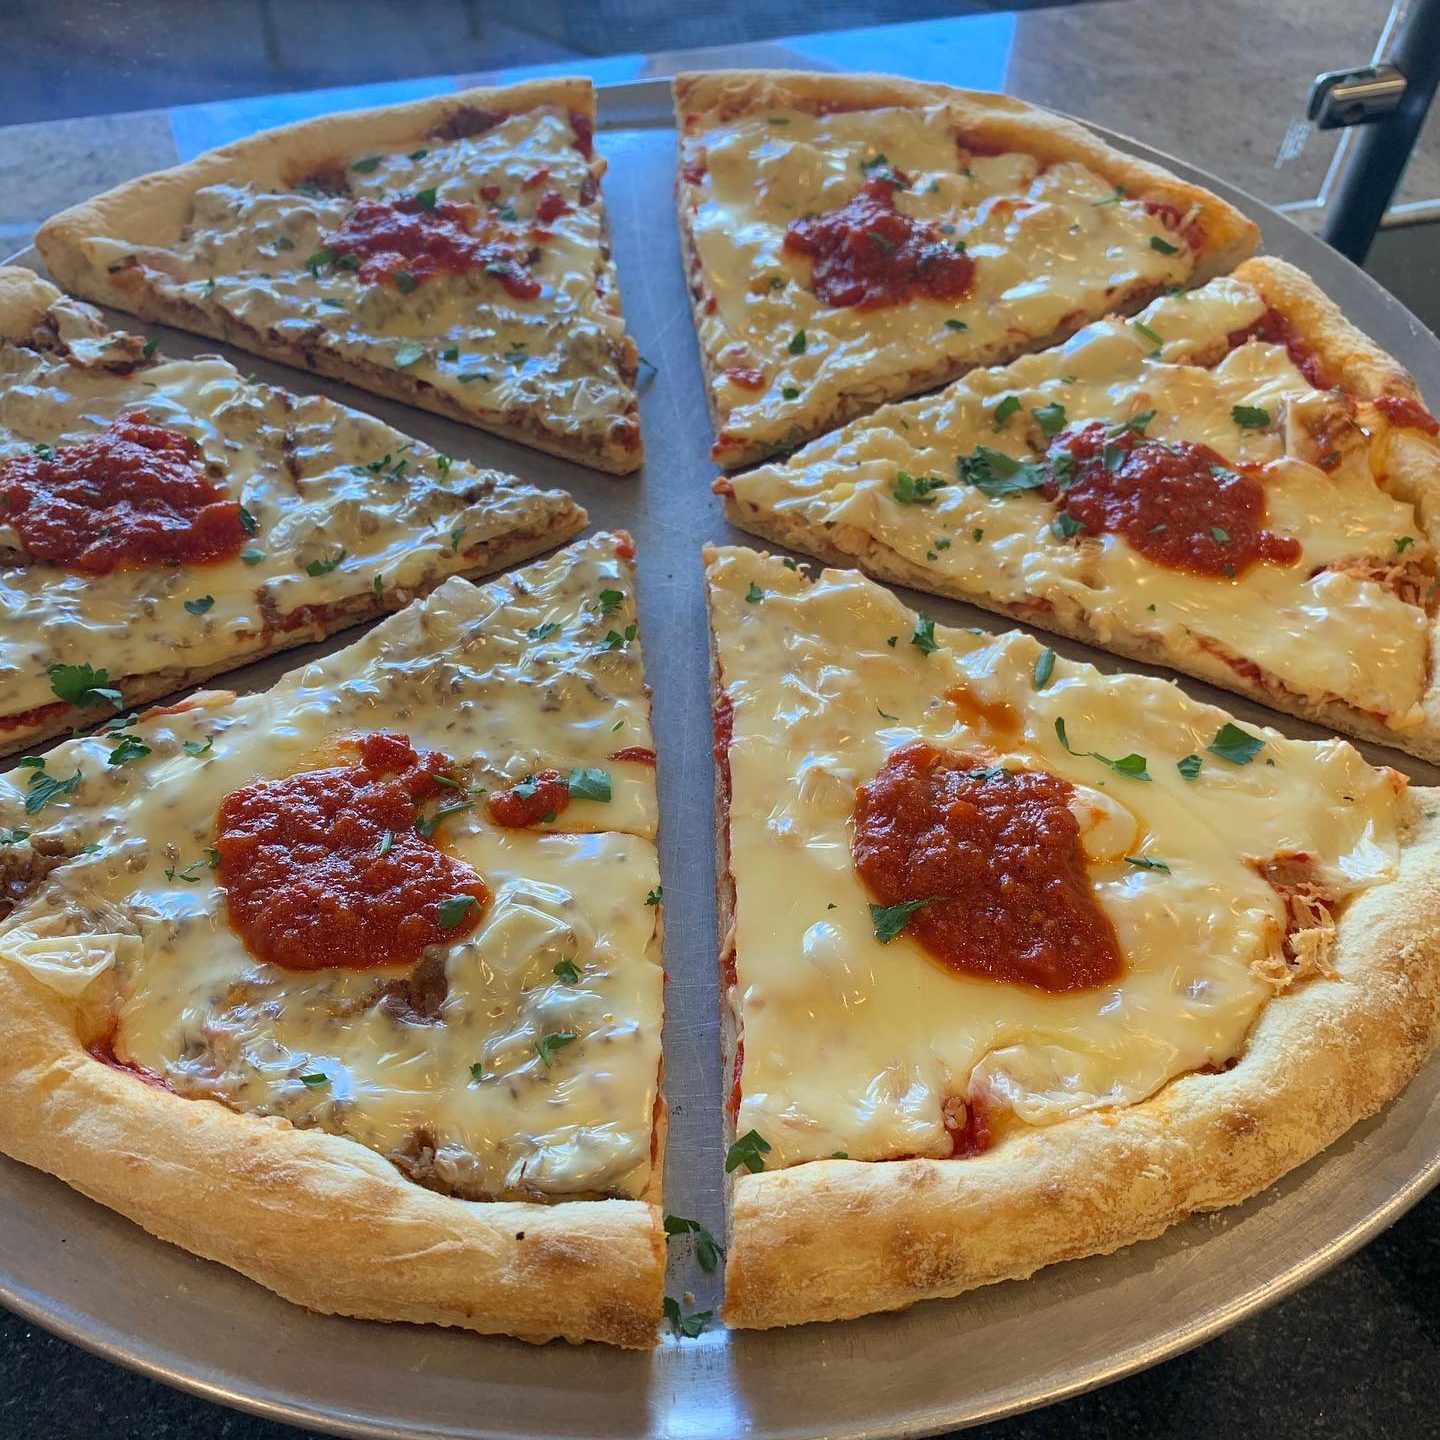 A slice of pizza on a metal pan.